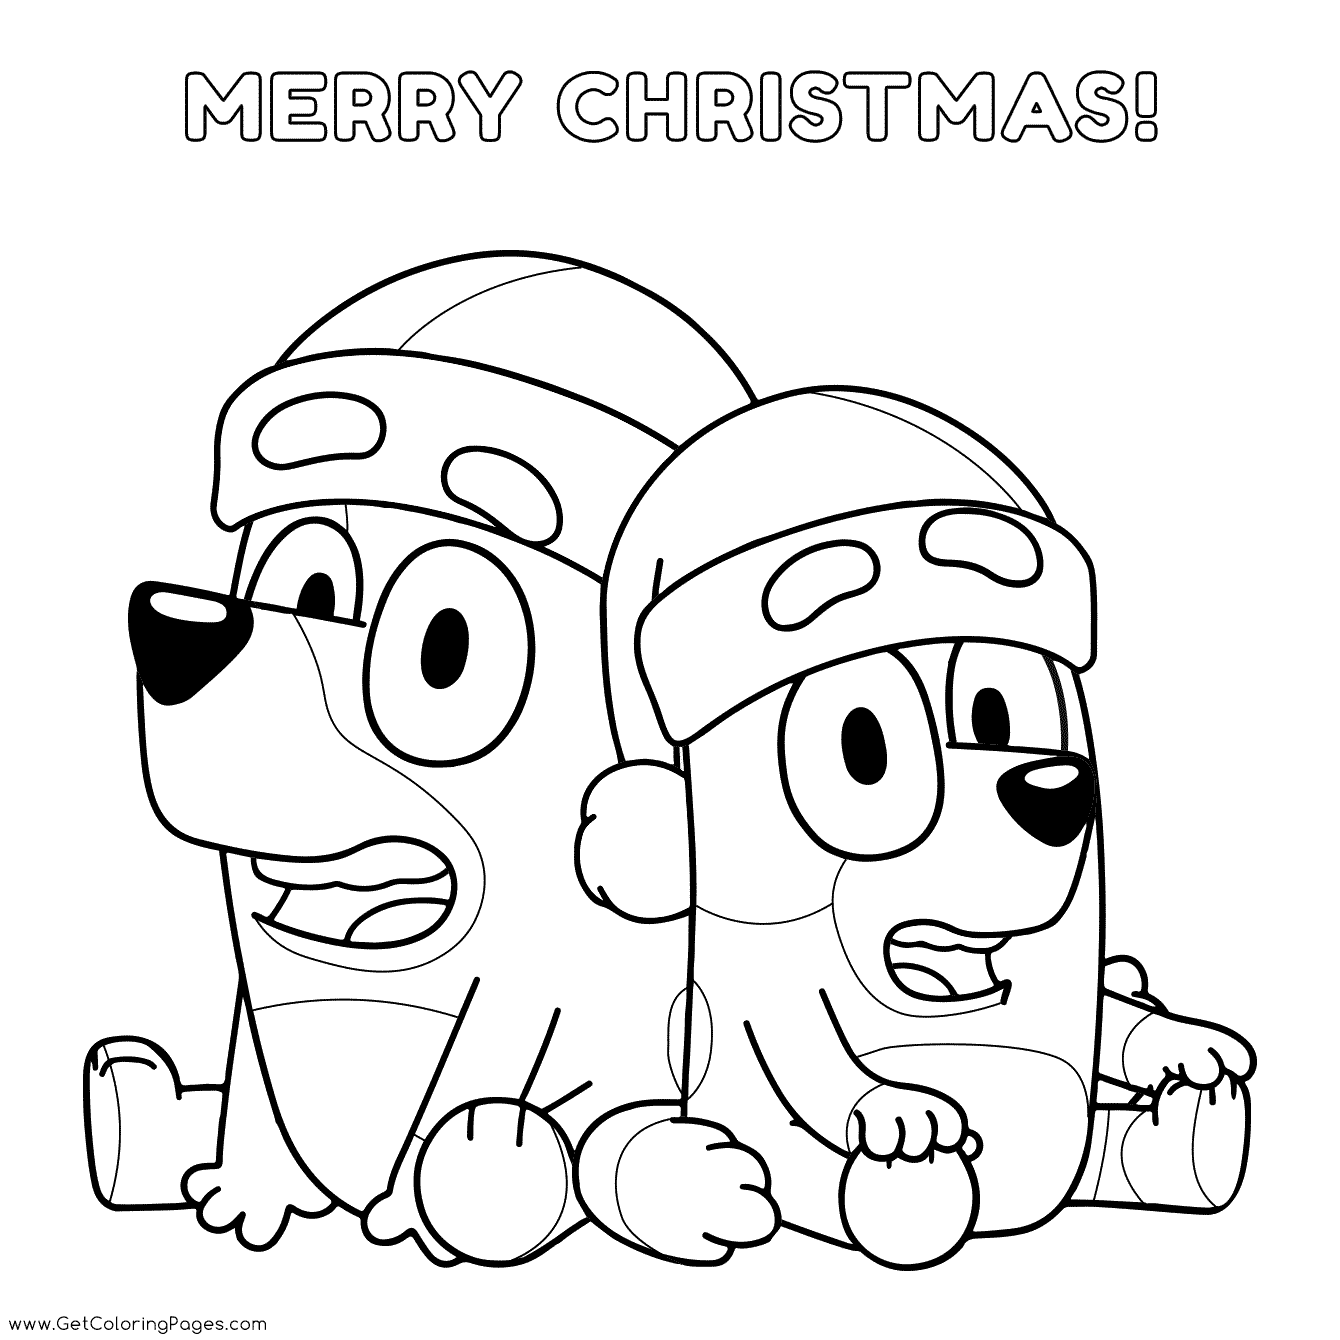 Bluey Christmas Colouring Pages - Get Coloring Pages